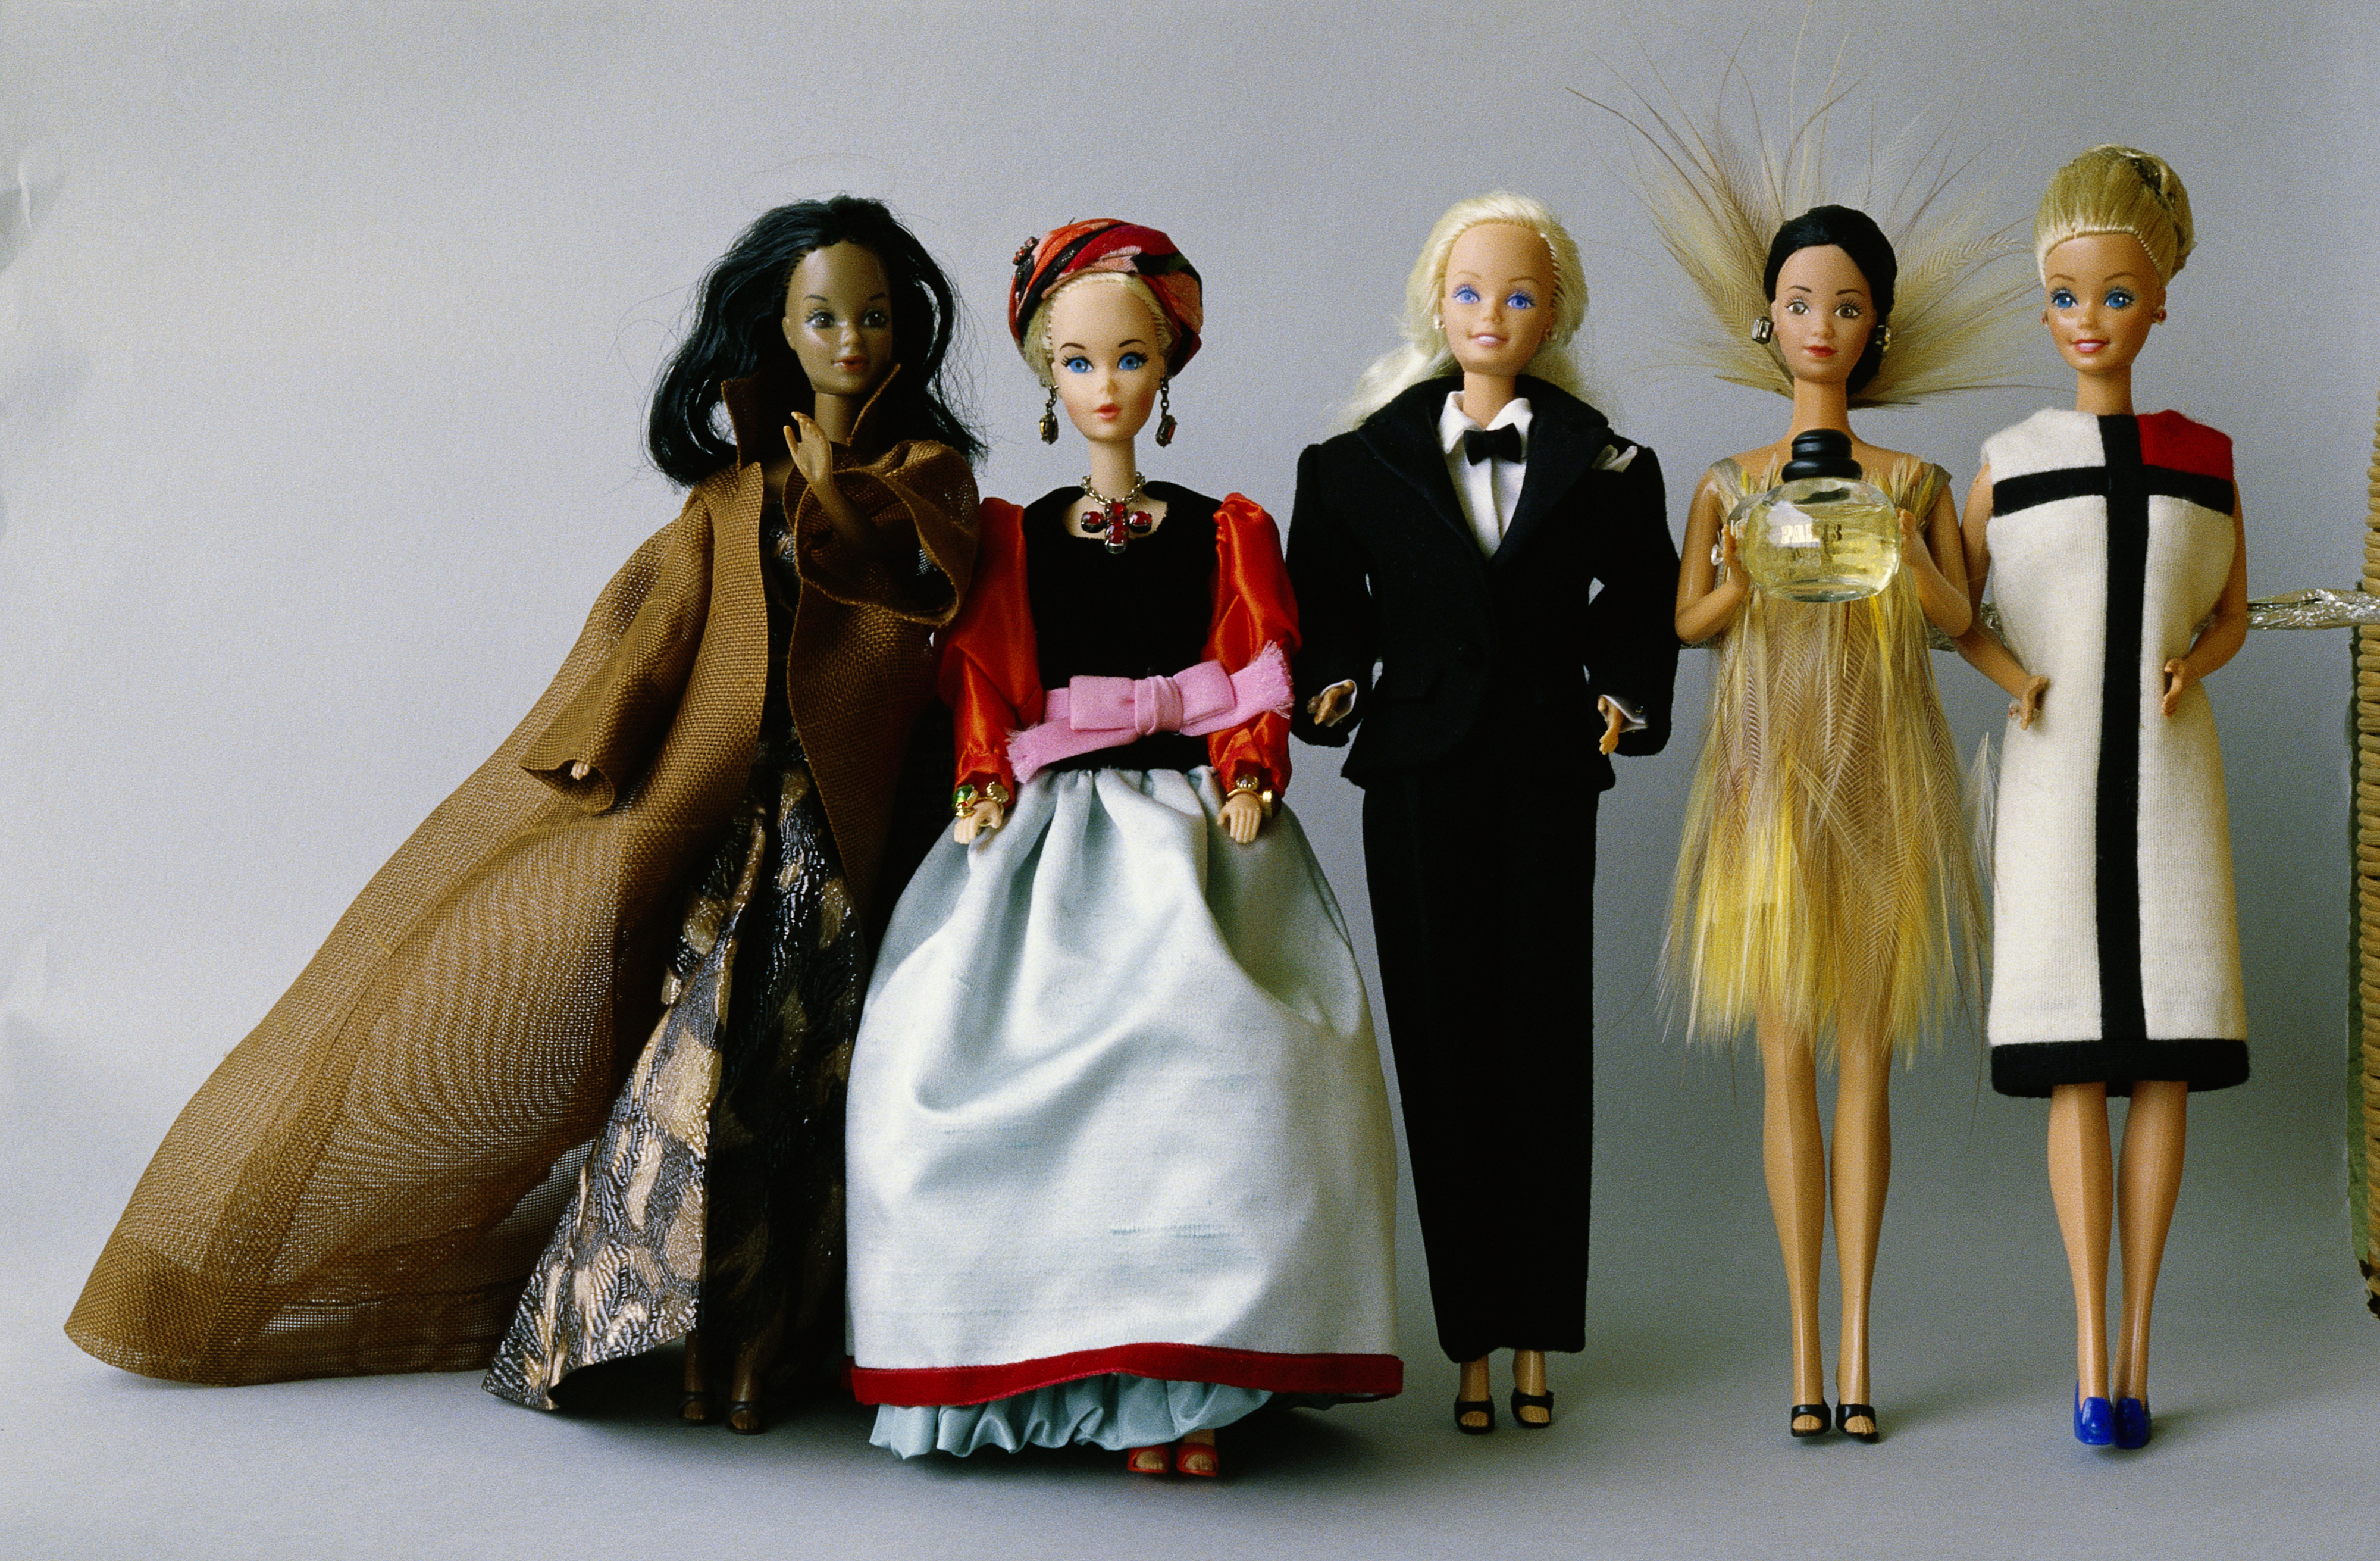 Barbie dolls from the collection of Barbie aficionado Billy Boy wear outfits designed by Yves Saint Laurent